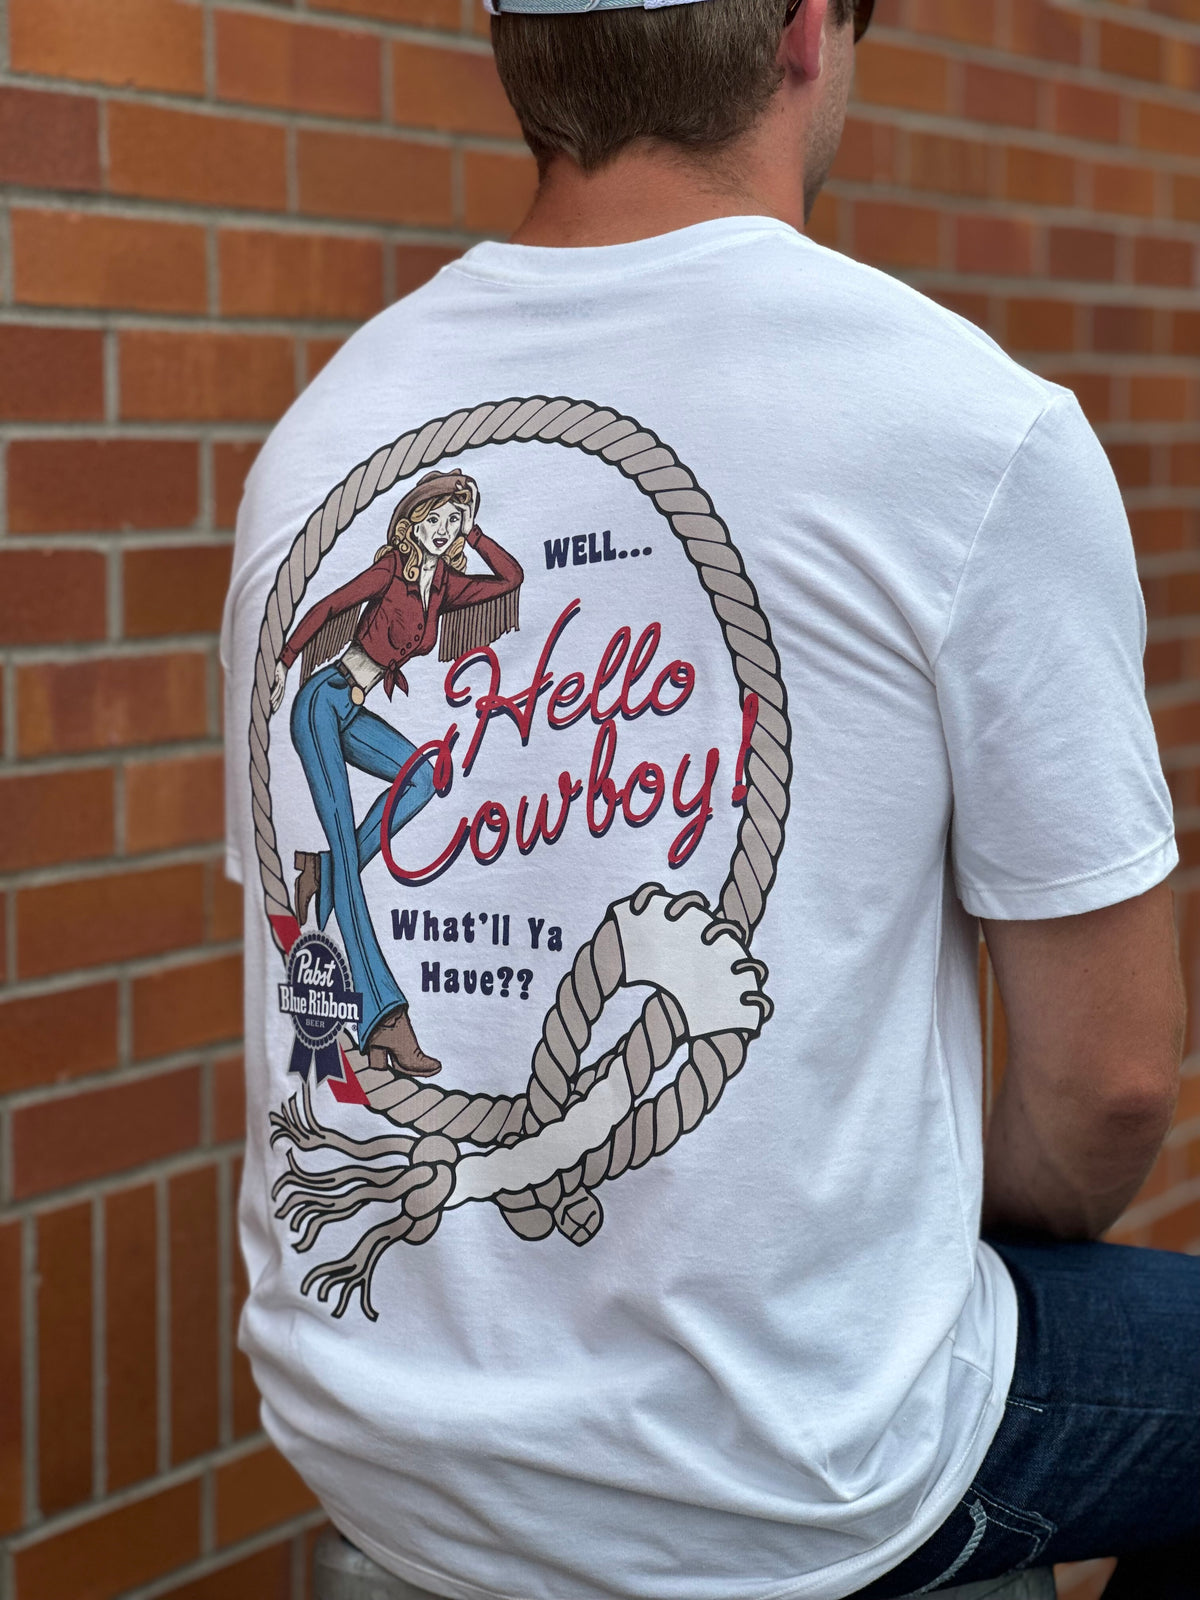 Hooey Men’s Pabst Blue Ribbon Graphic Tee in White